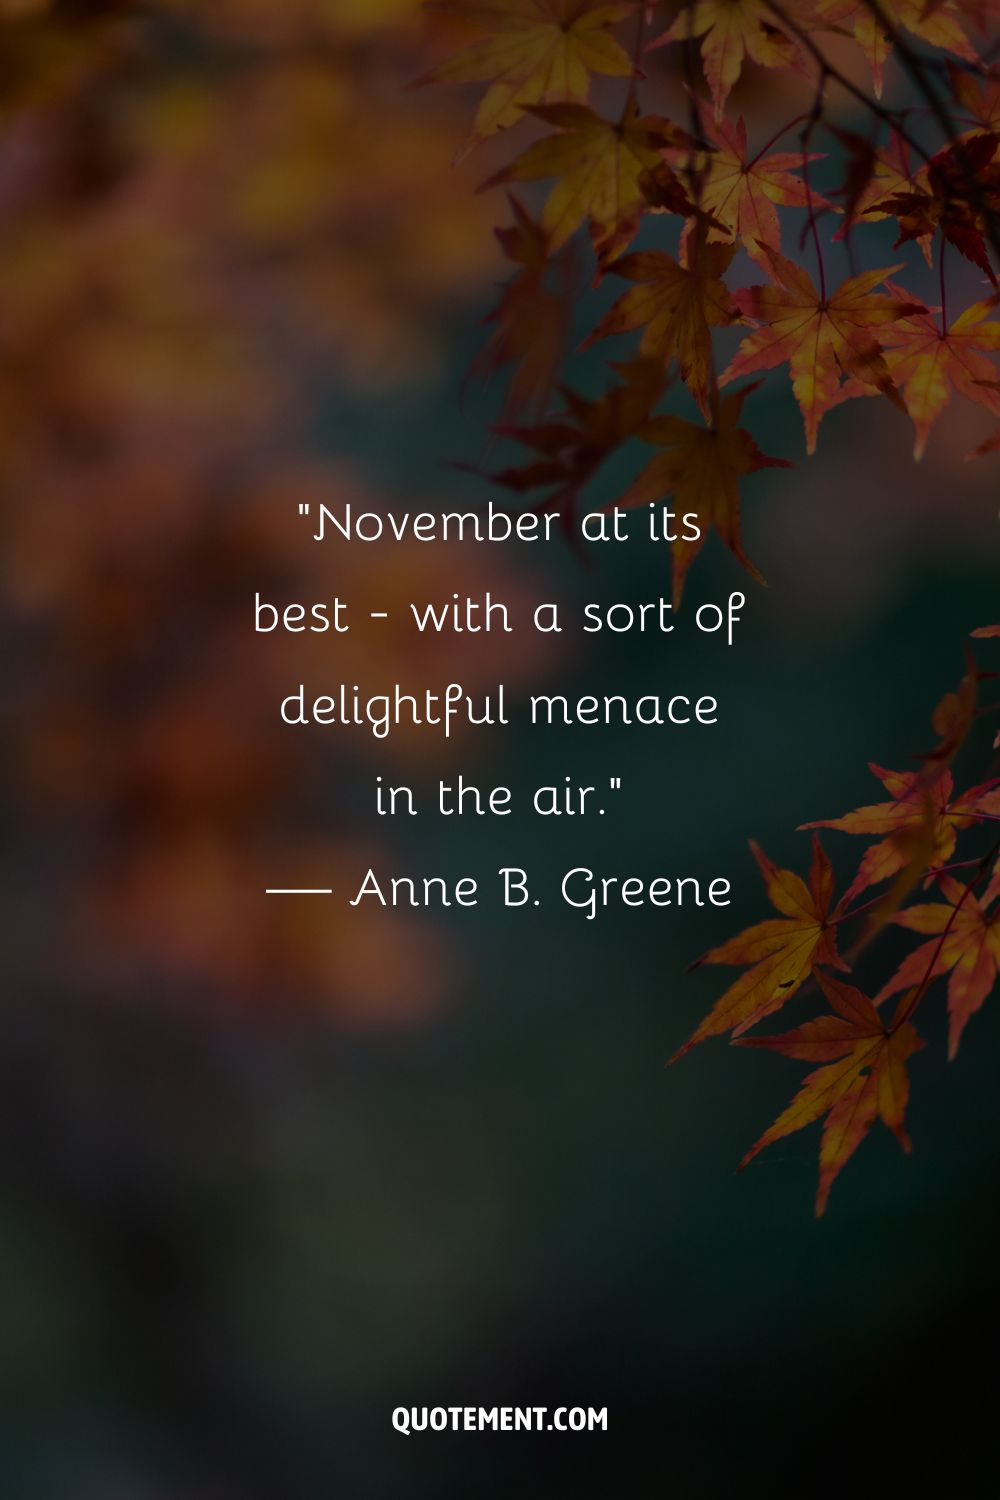 Image of vibrant orange leaves representing the loveliest November quote.
